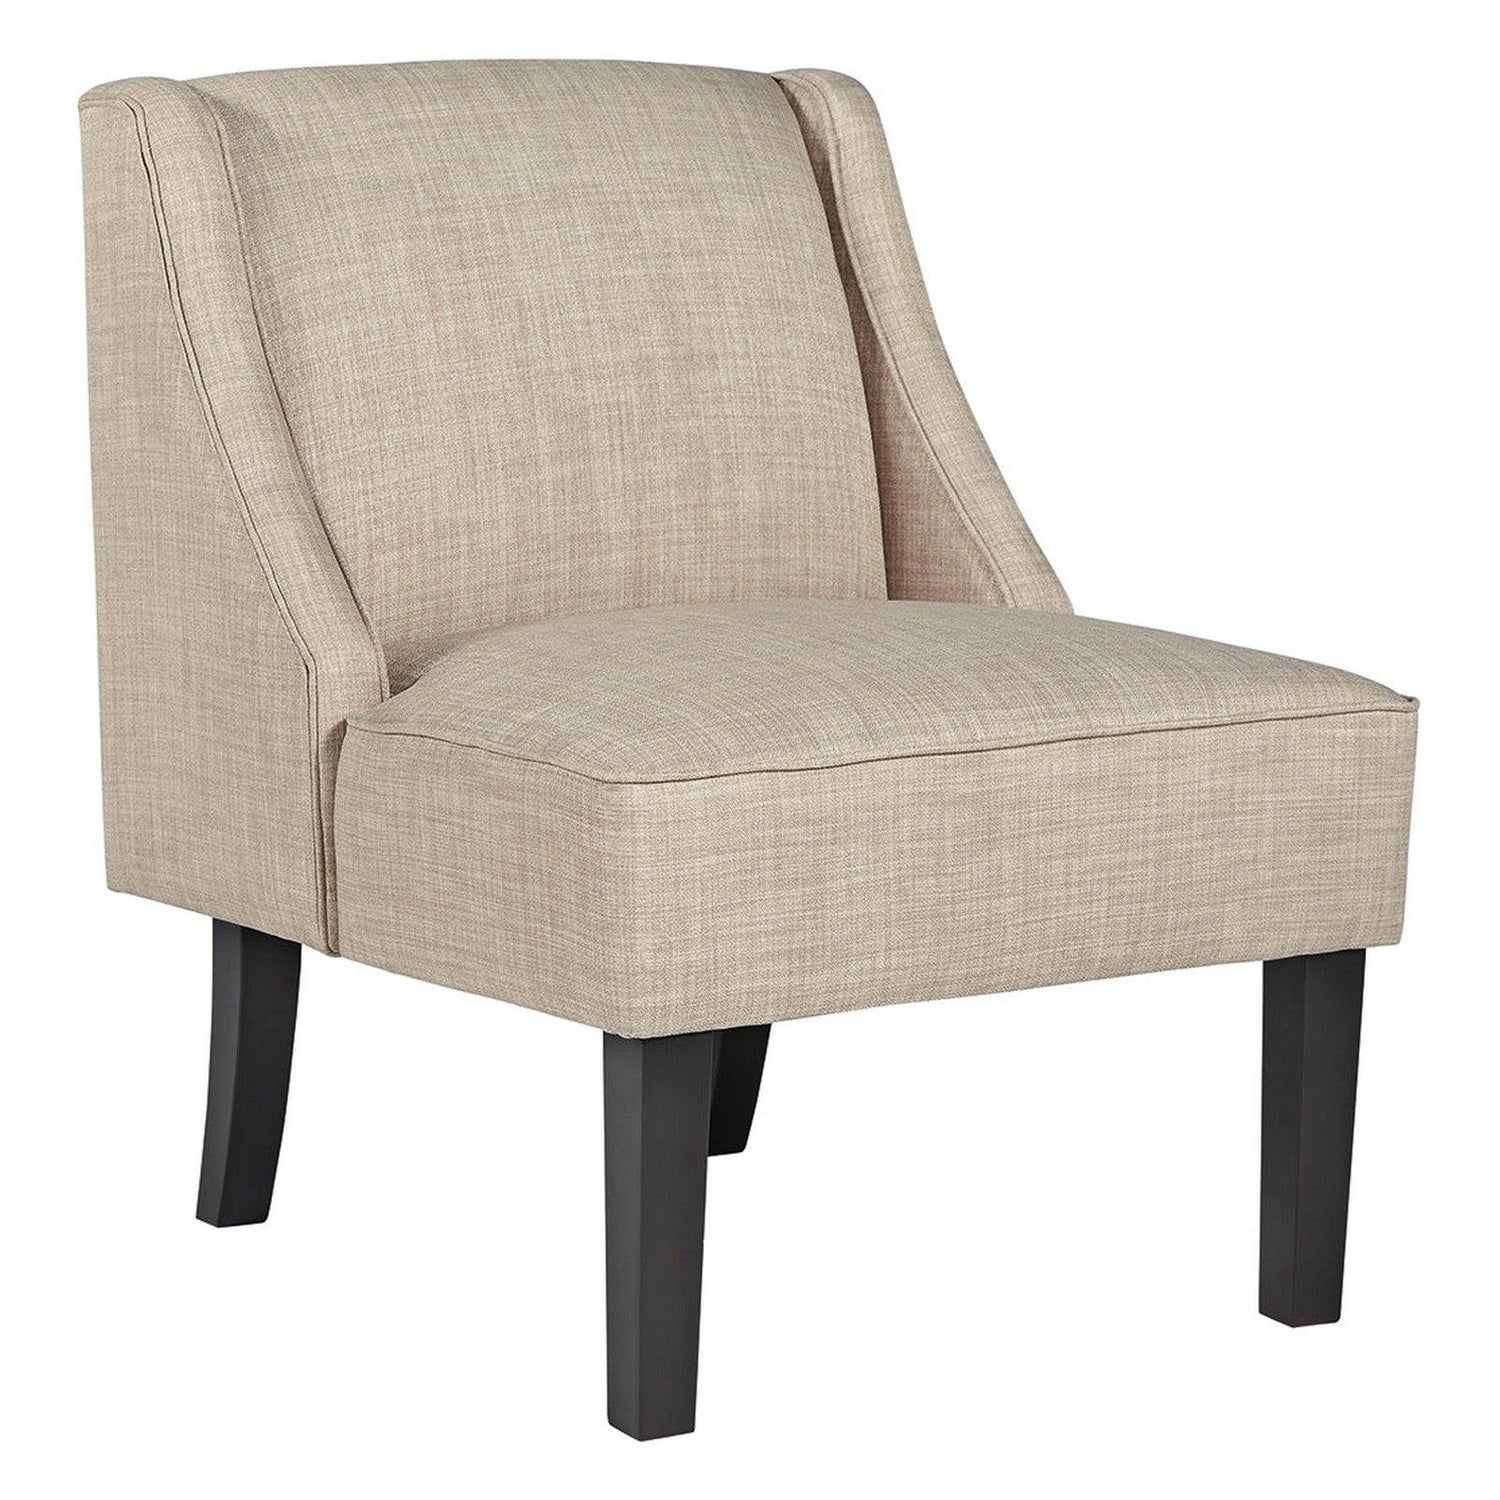 Janesley Accent Chair Ash-A3000139